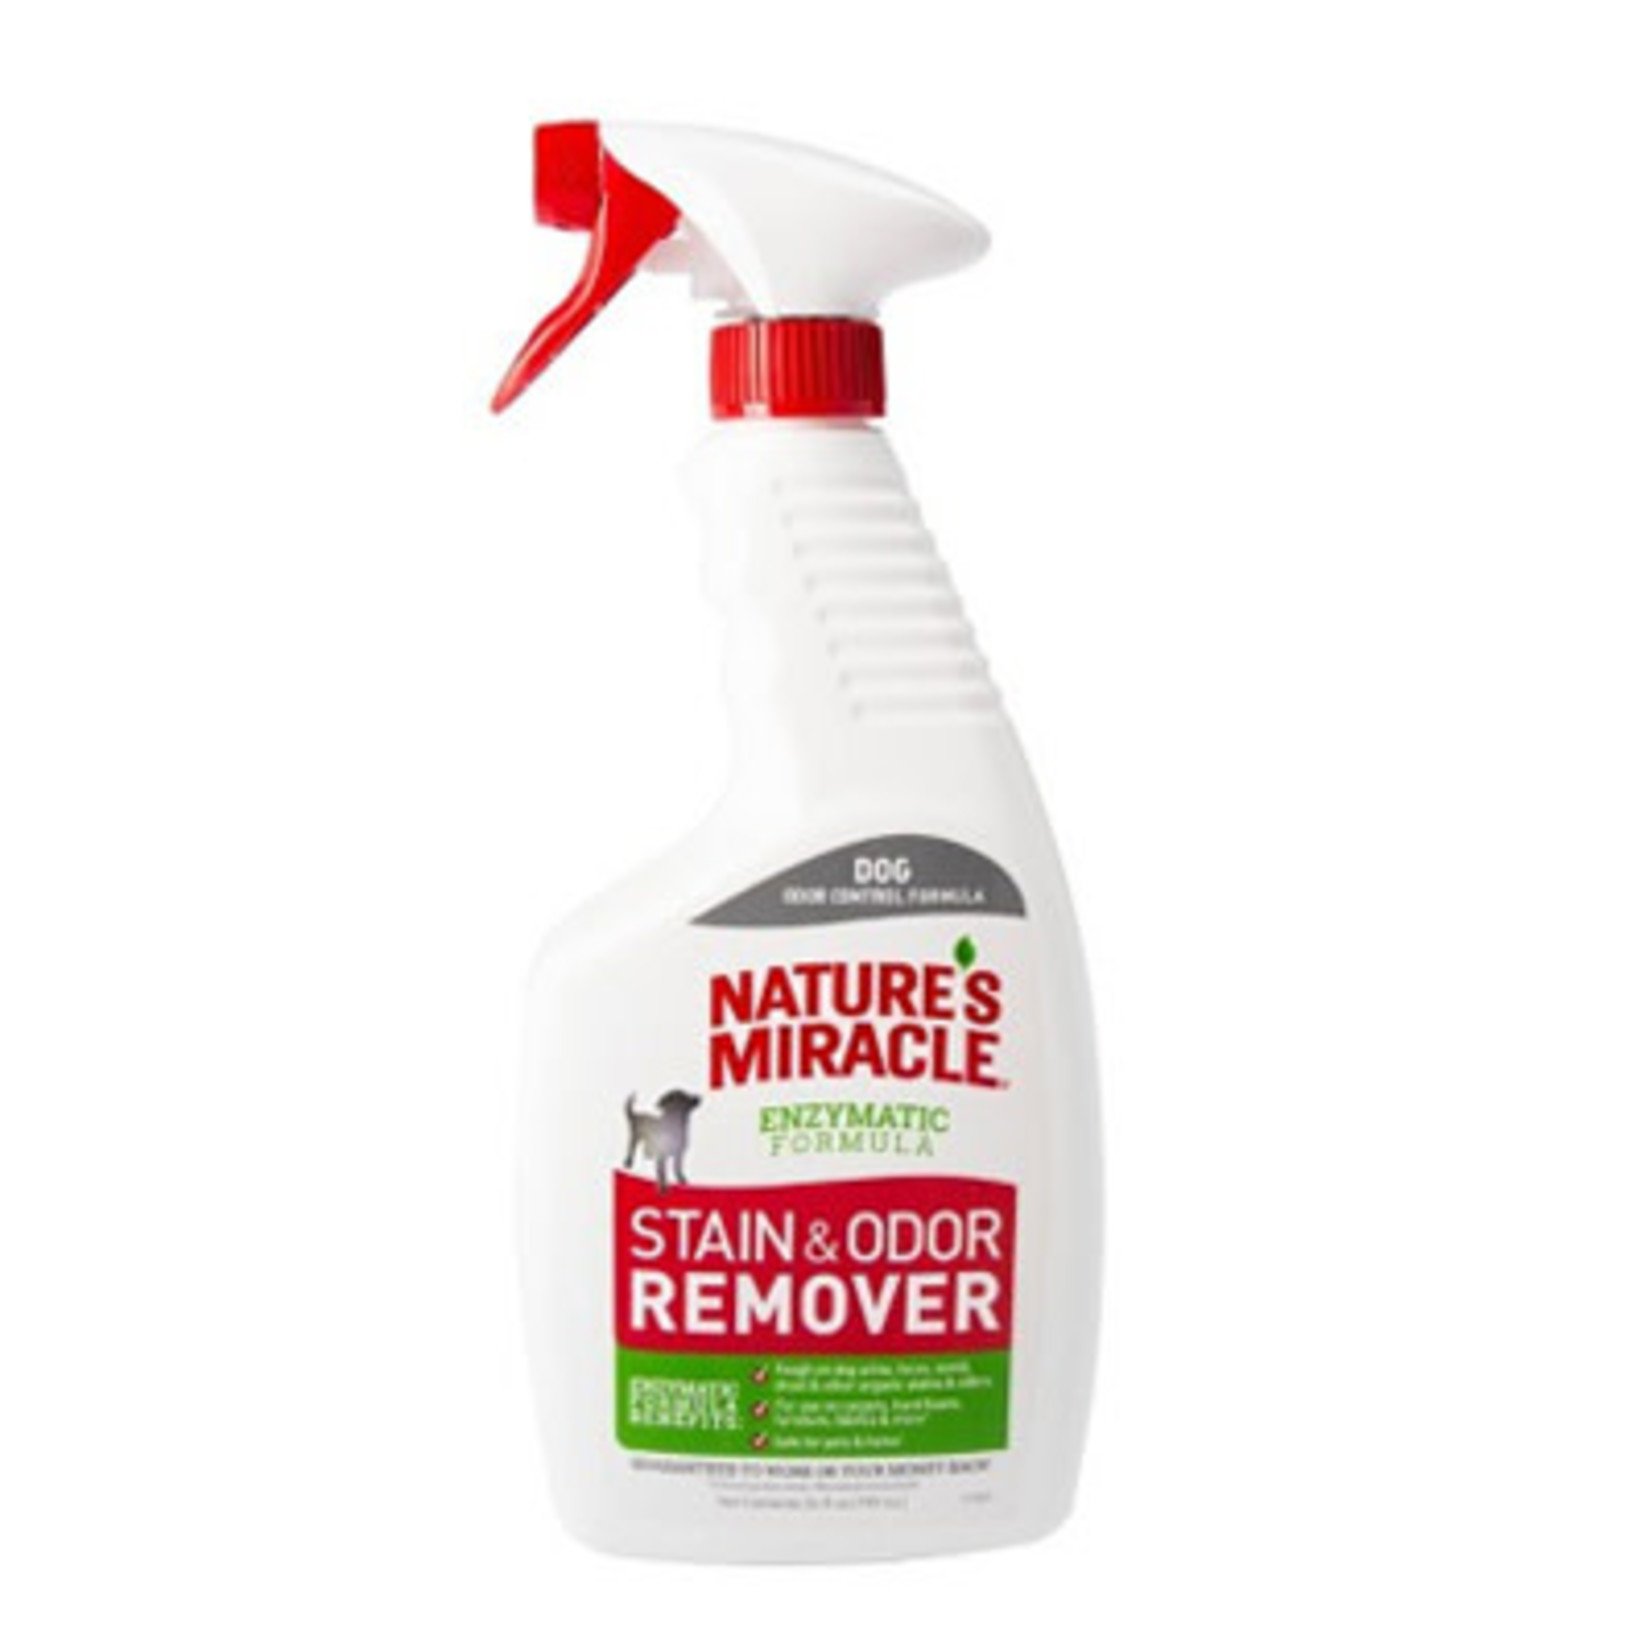 Natures Miracle 24oz Spray Stain & Odor Remover Natures Miracle